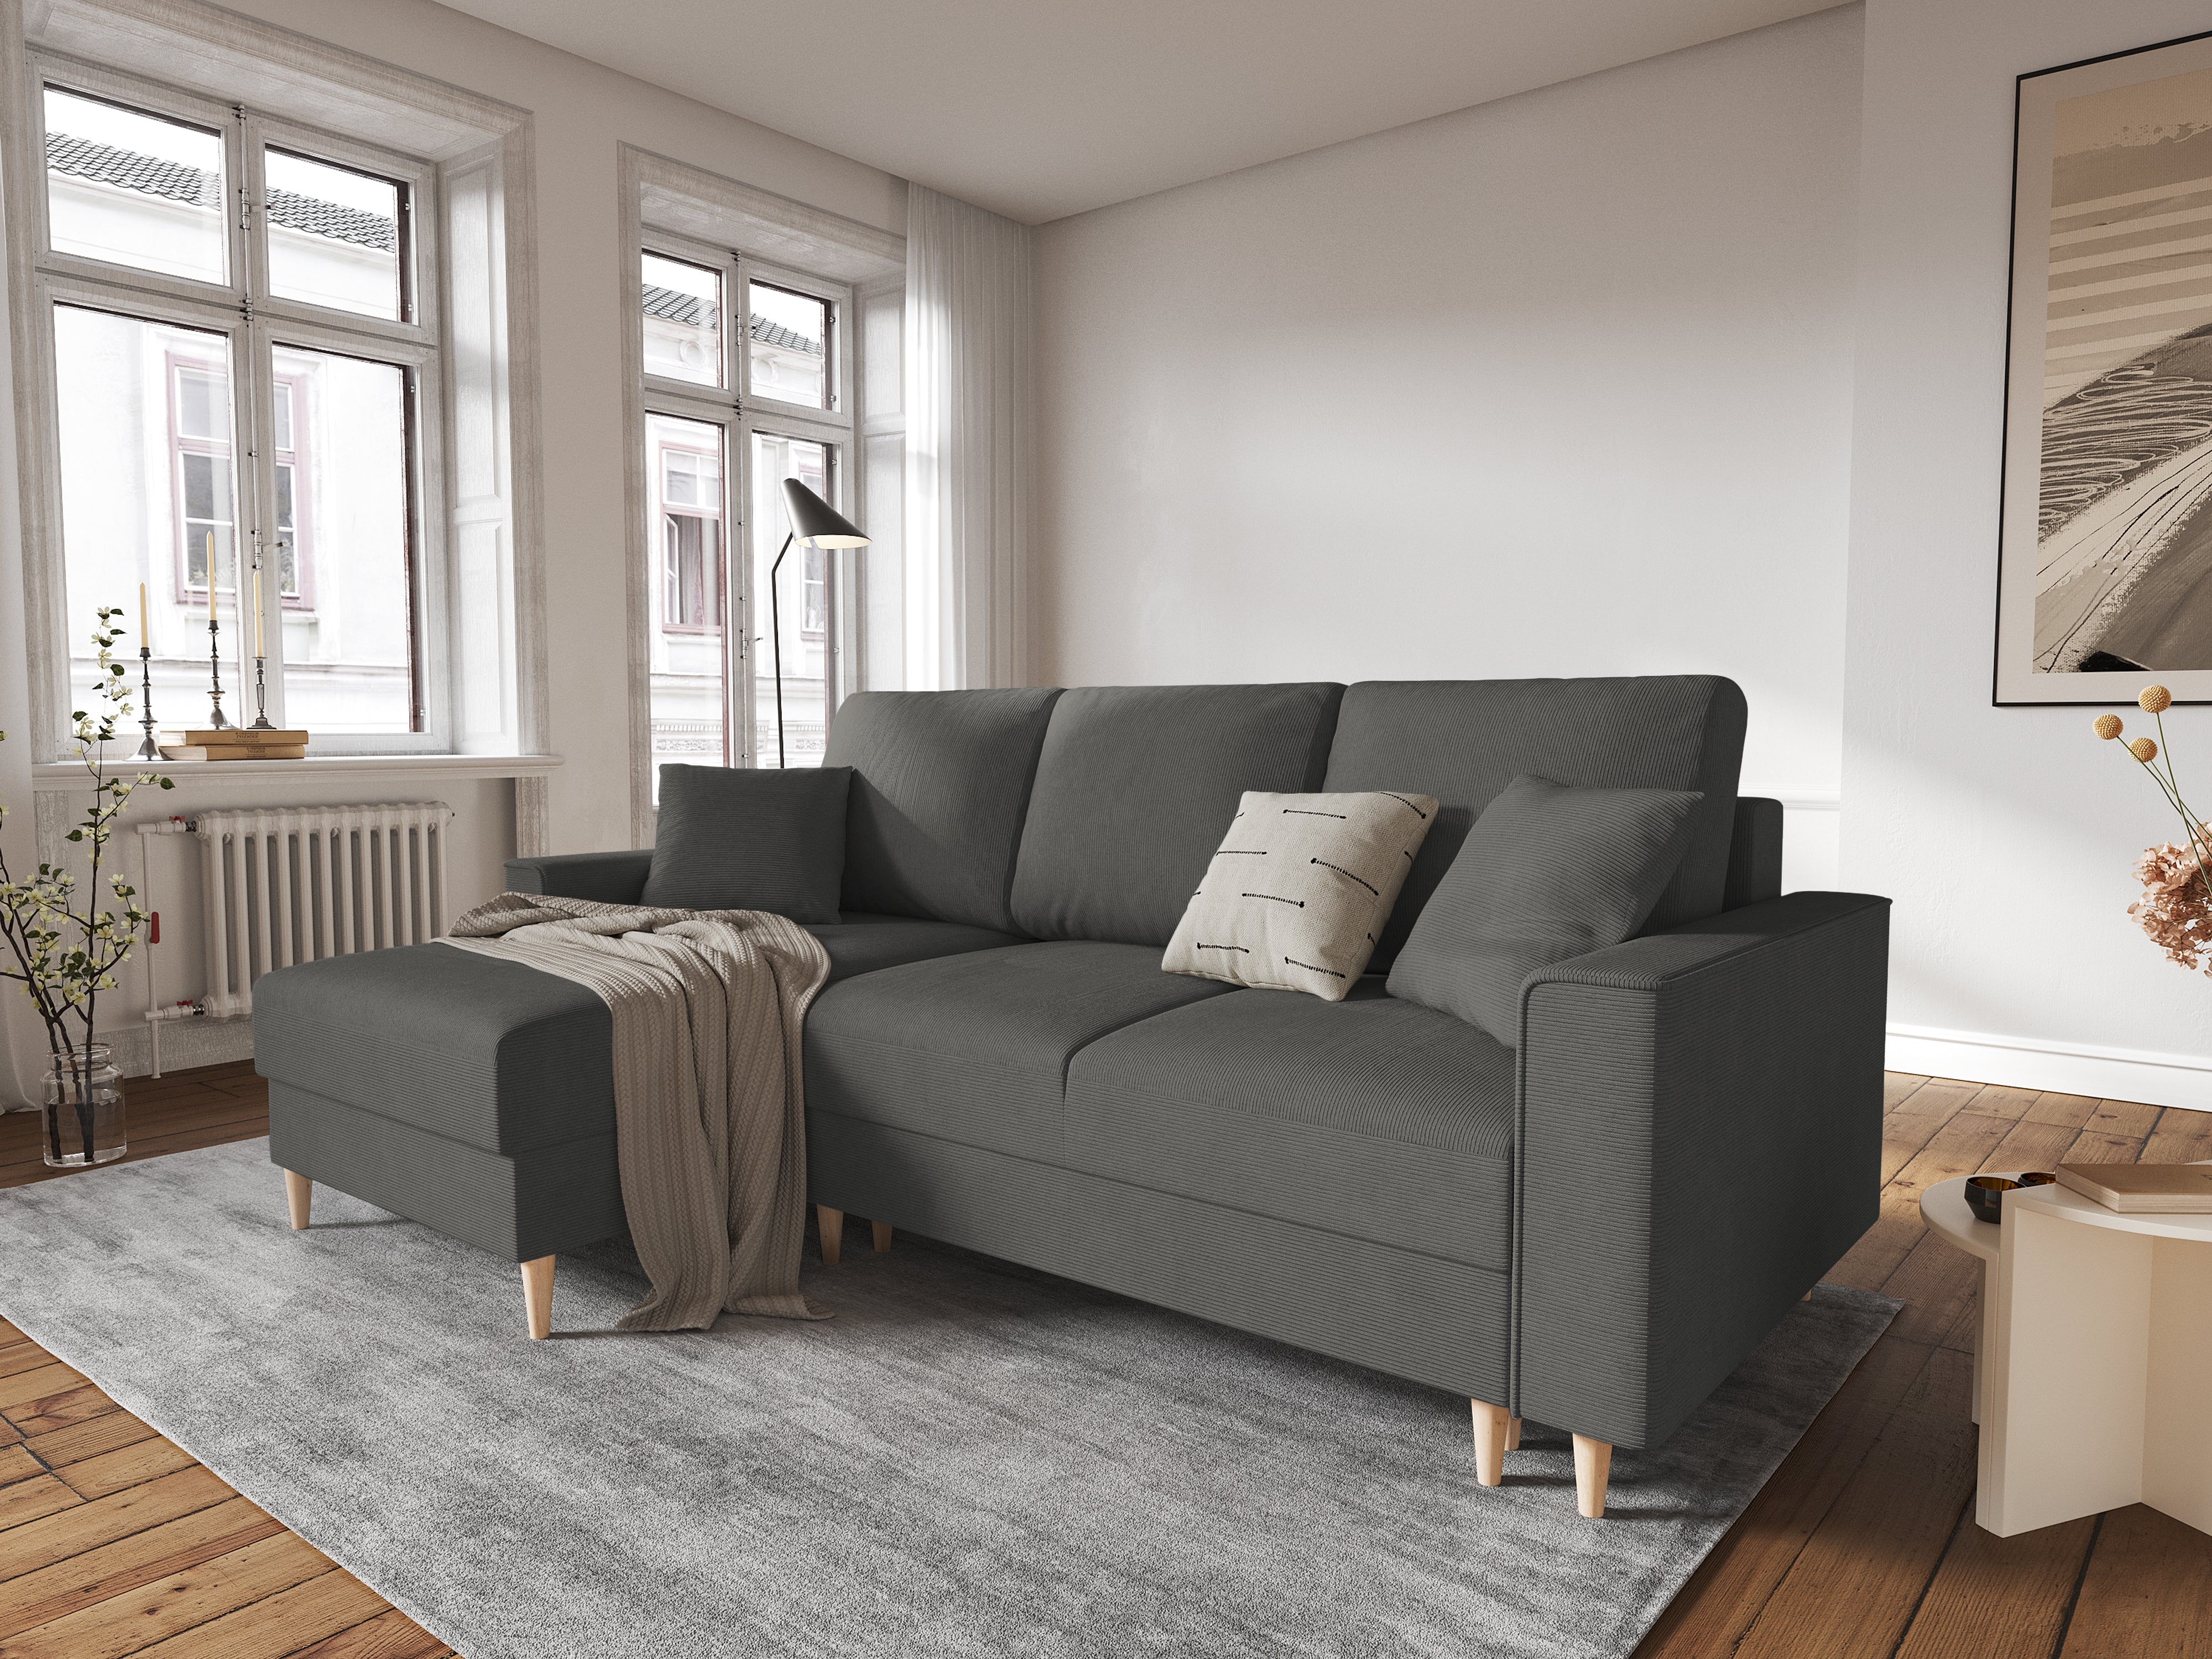 Left Corner Sofa With Bed Function And Box, "Cartadera", 4 Seats, 225x147x90
Made in Europe, Mazzini Sofas, Eye on Design